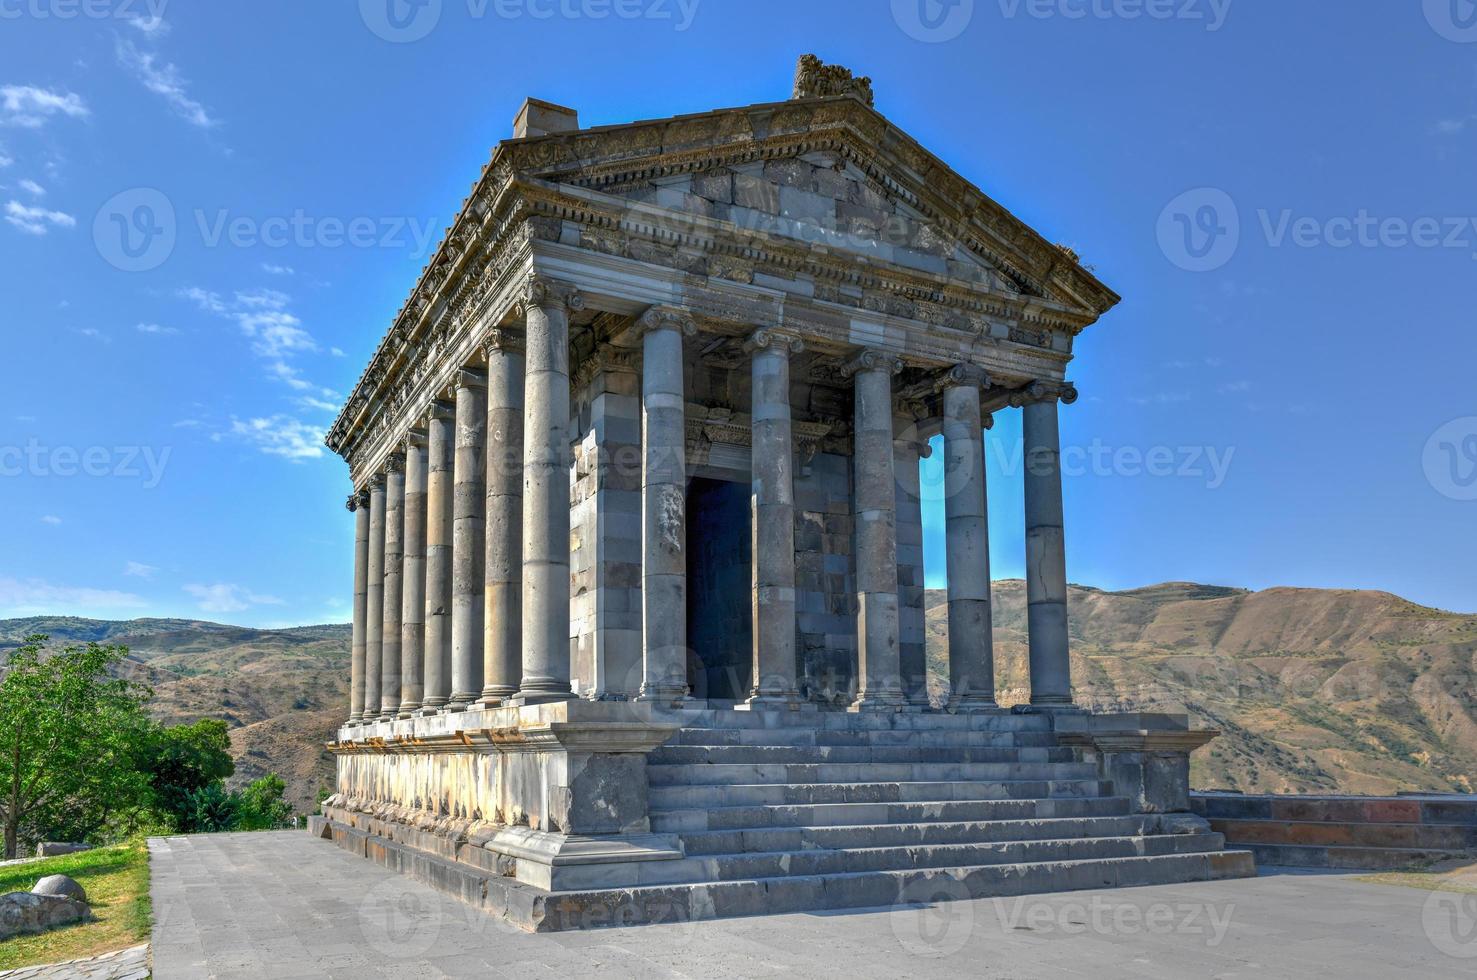 Temple of Garni, an Ionic Pagan temple located in the village of Garni, Armenia. It is the best-known structure and symbol of pre-Christian Armenia. photo